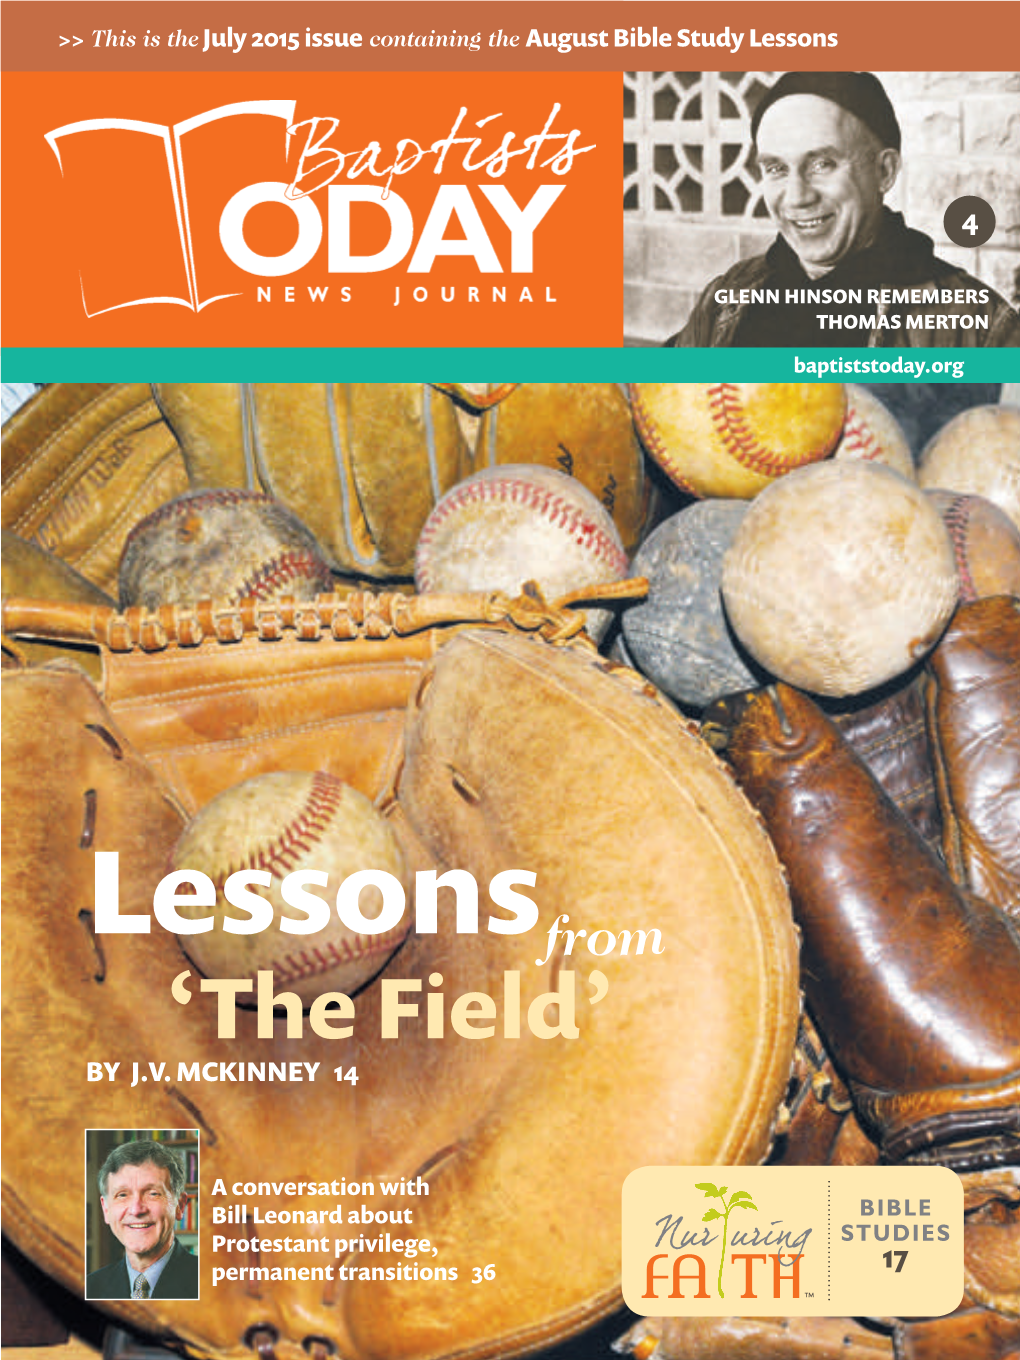 July 2015 Issue Containing the August Bible Study Lessons